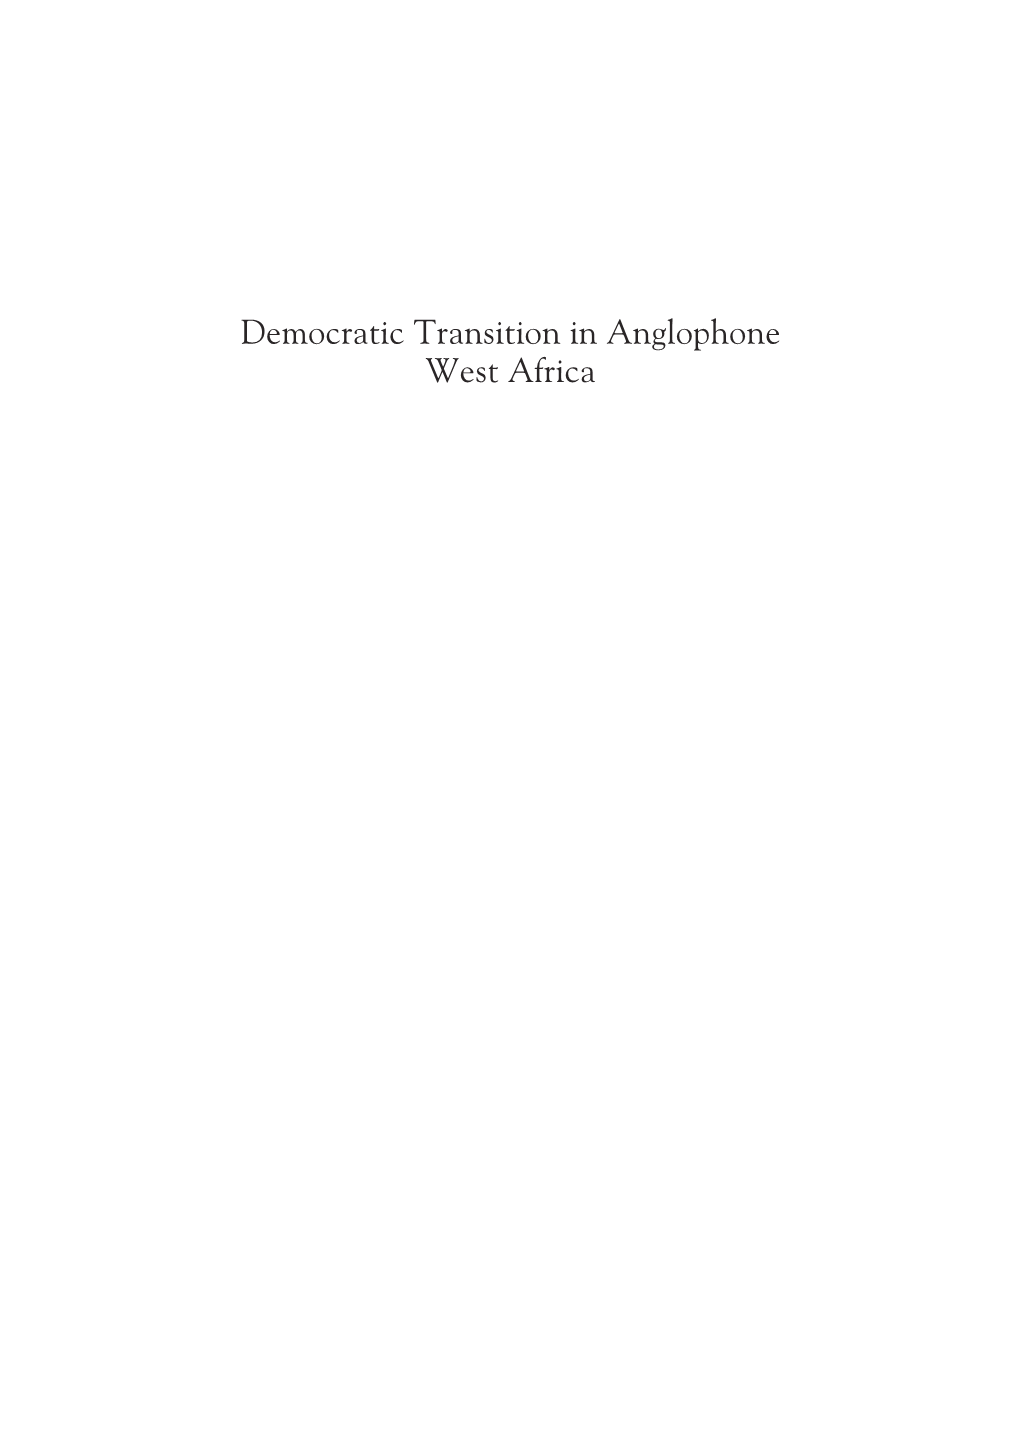 Democratic Transition in Anglophone West Africa Byjibrin Ibrahim